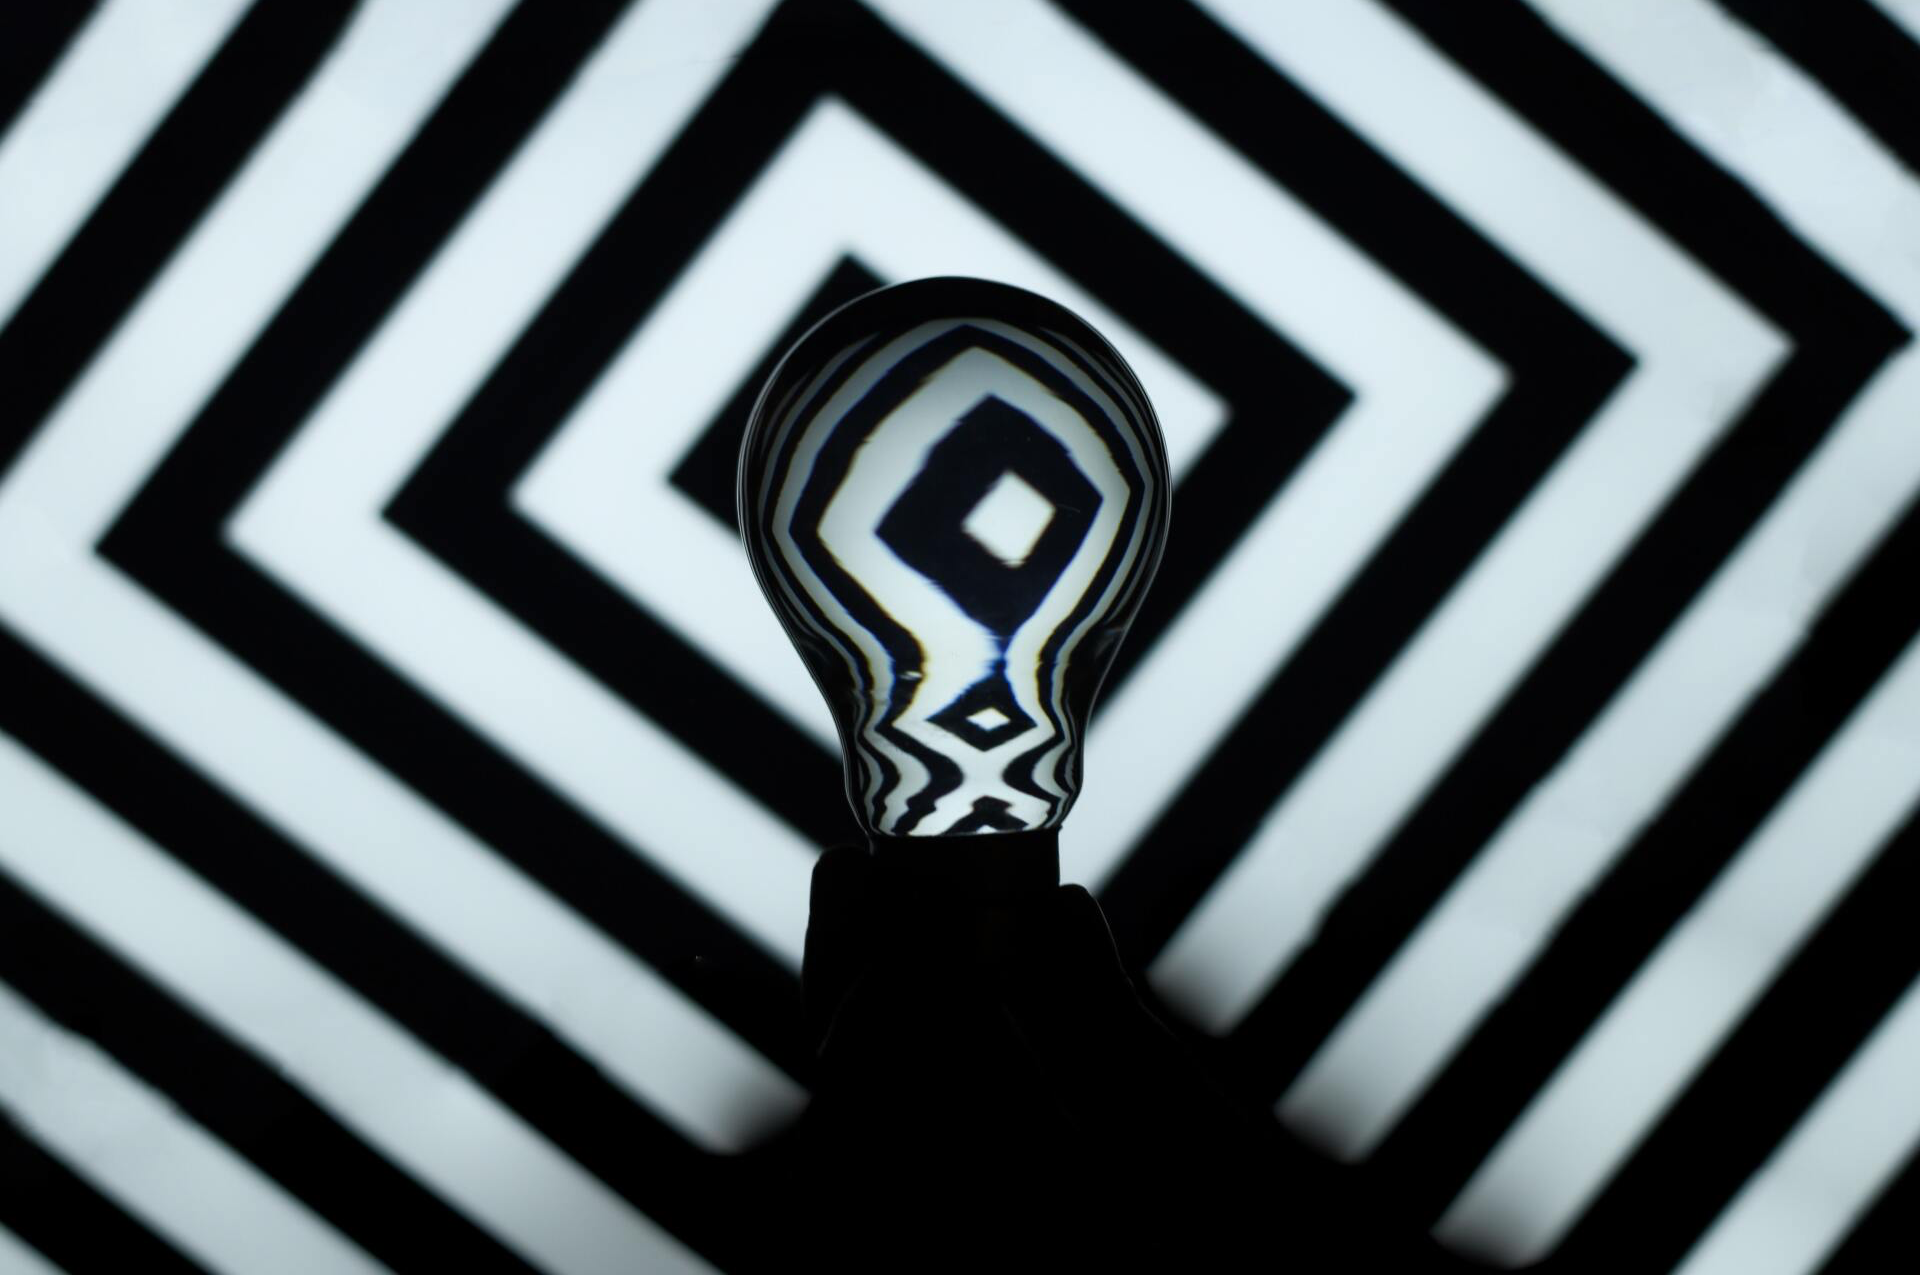 Black lines repeating pattern with lightbulb